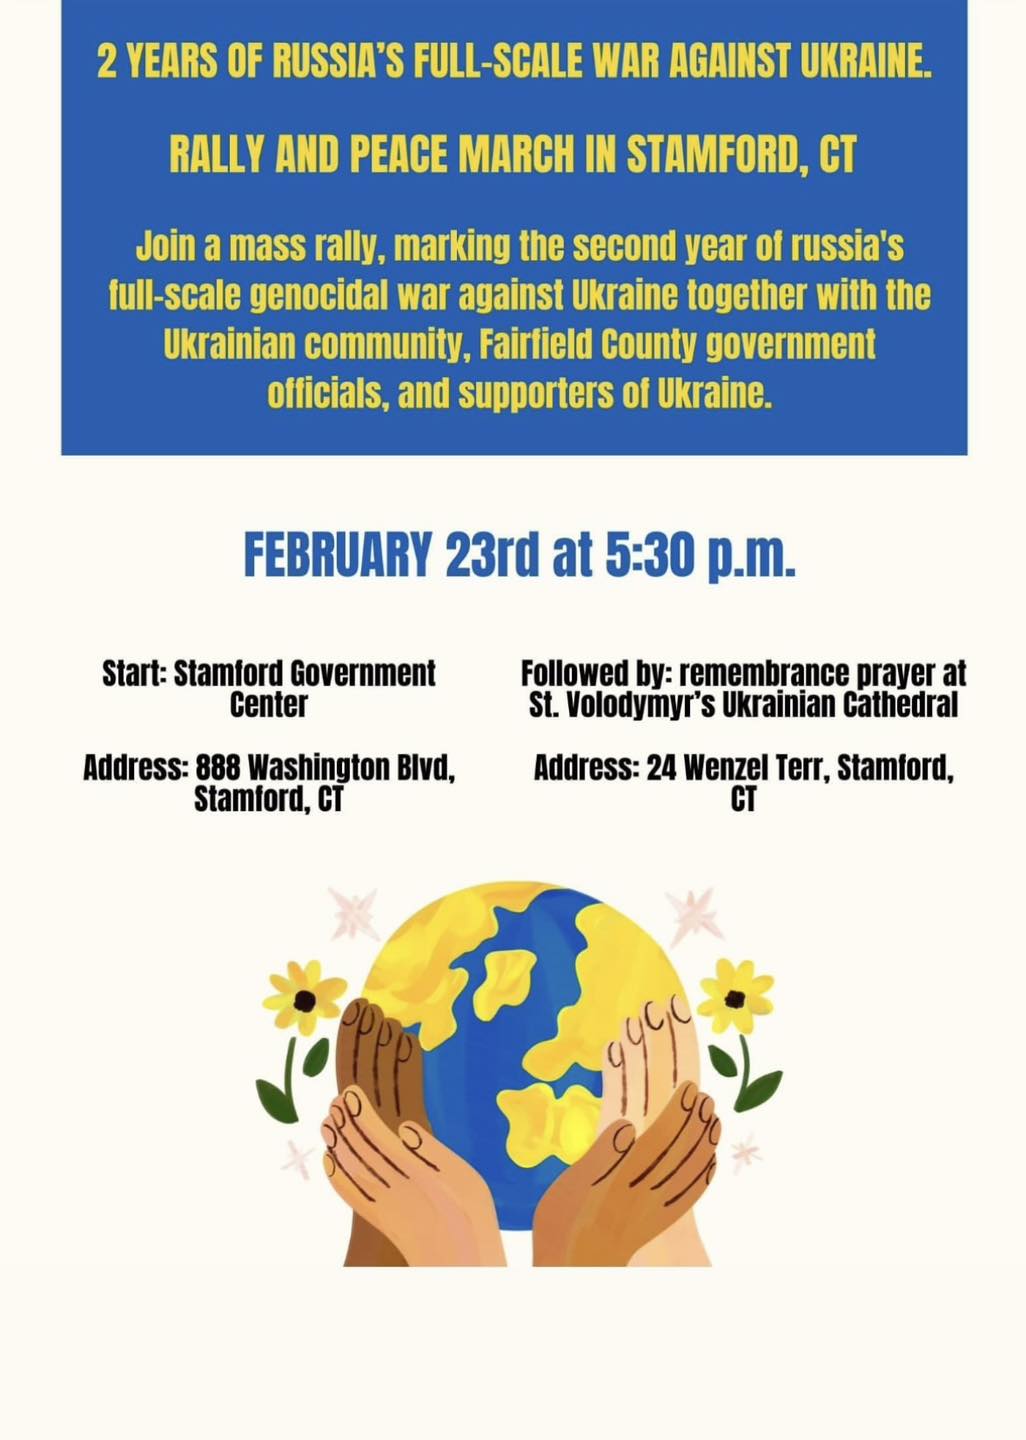 Rally and Peace March - Feb 23 - CT